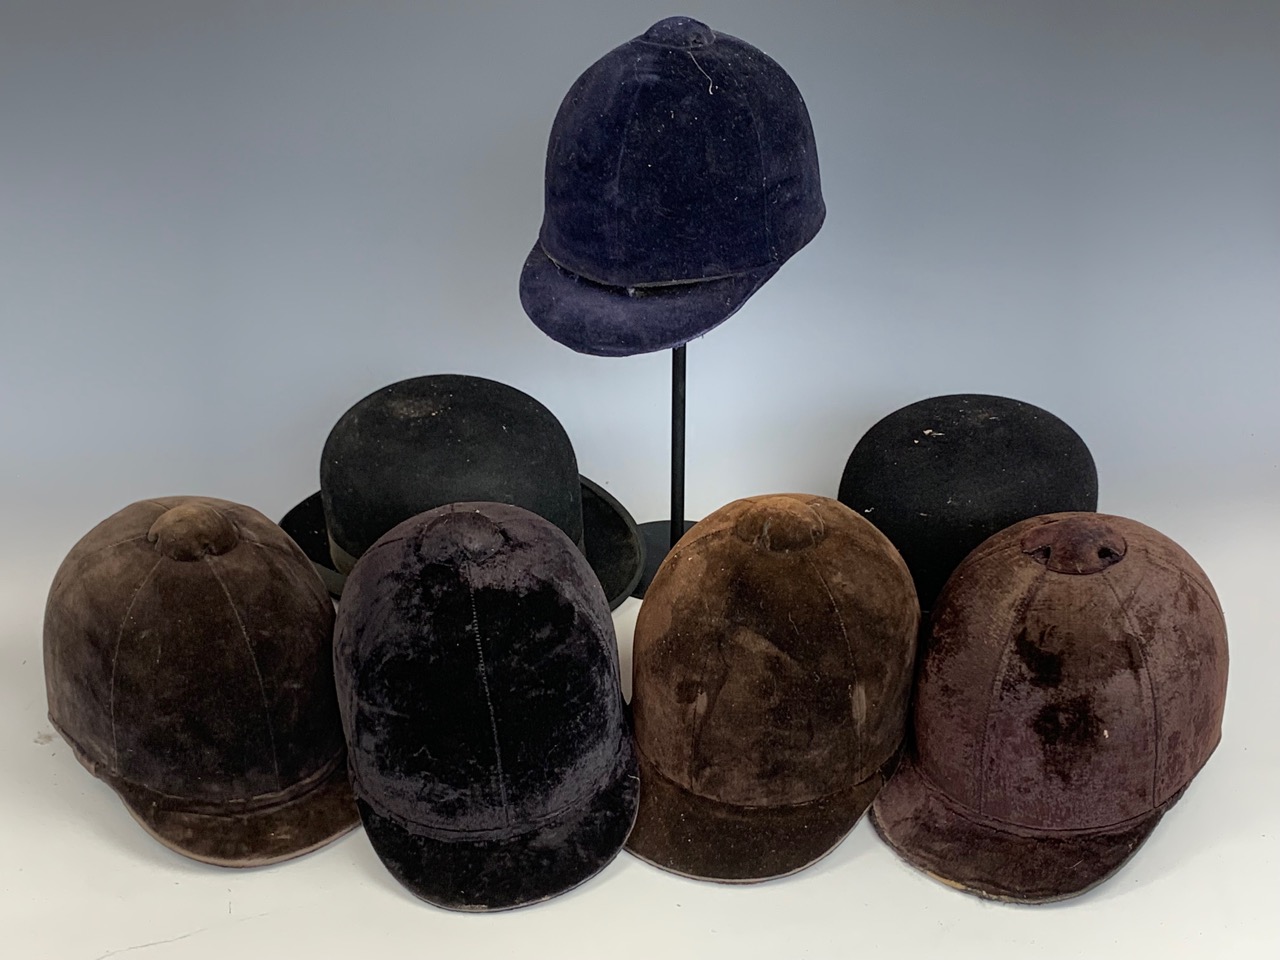 A group of vintage riding helmets and hats